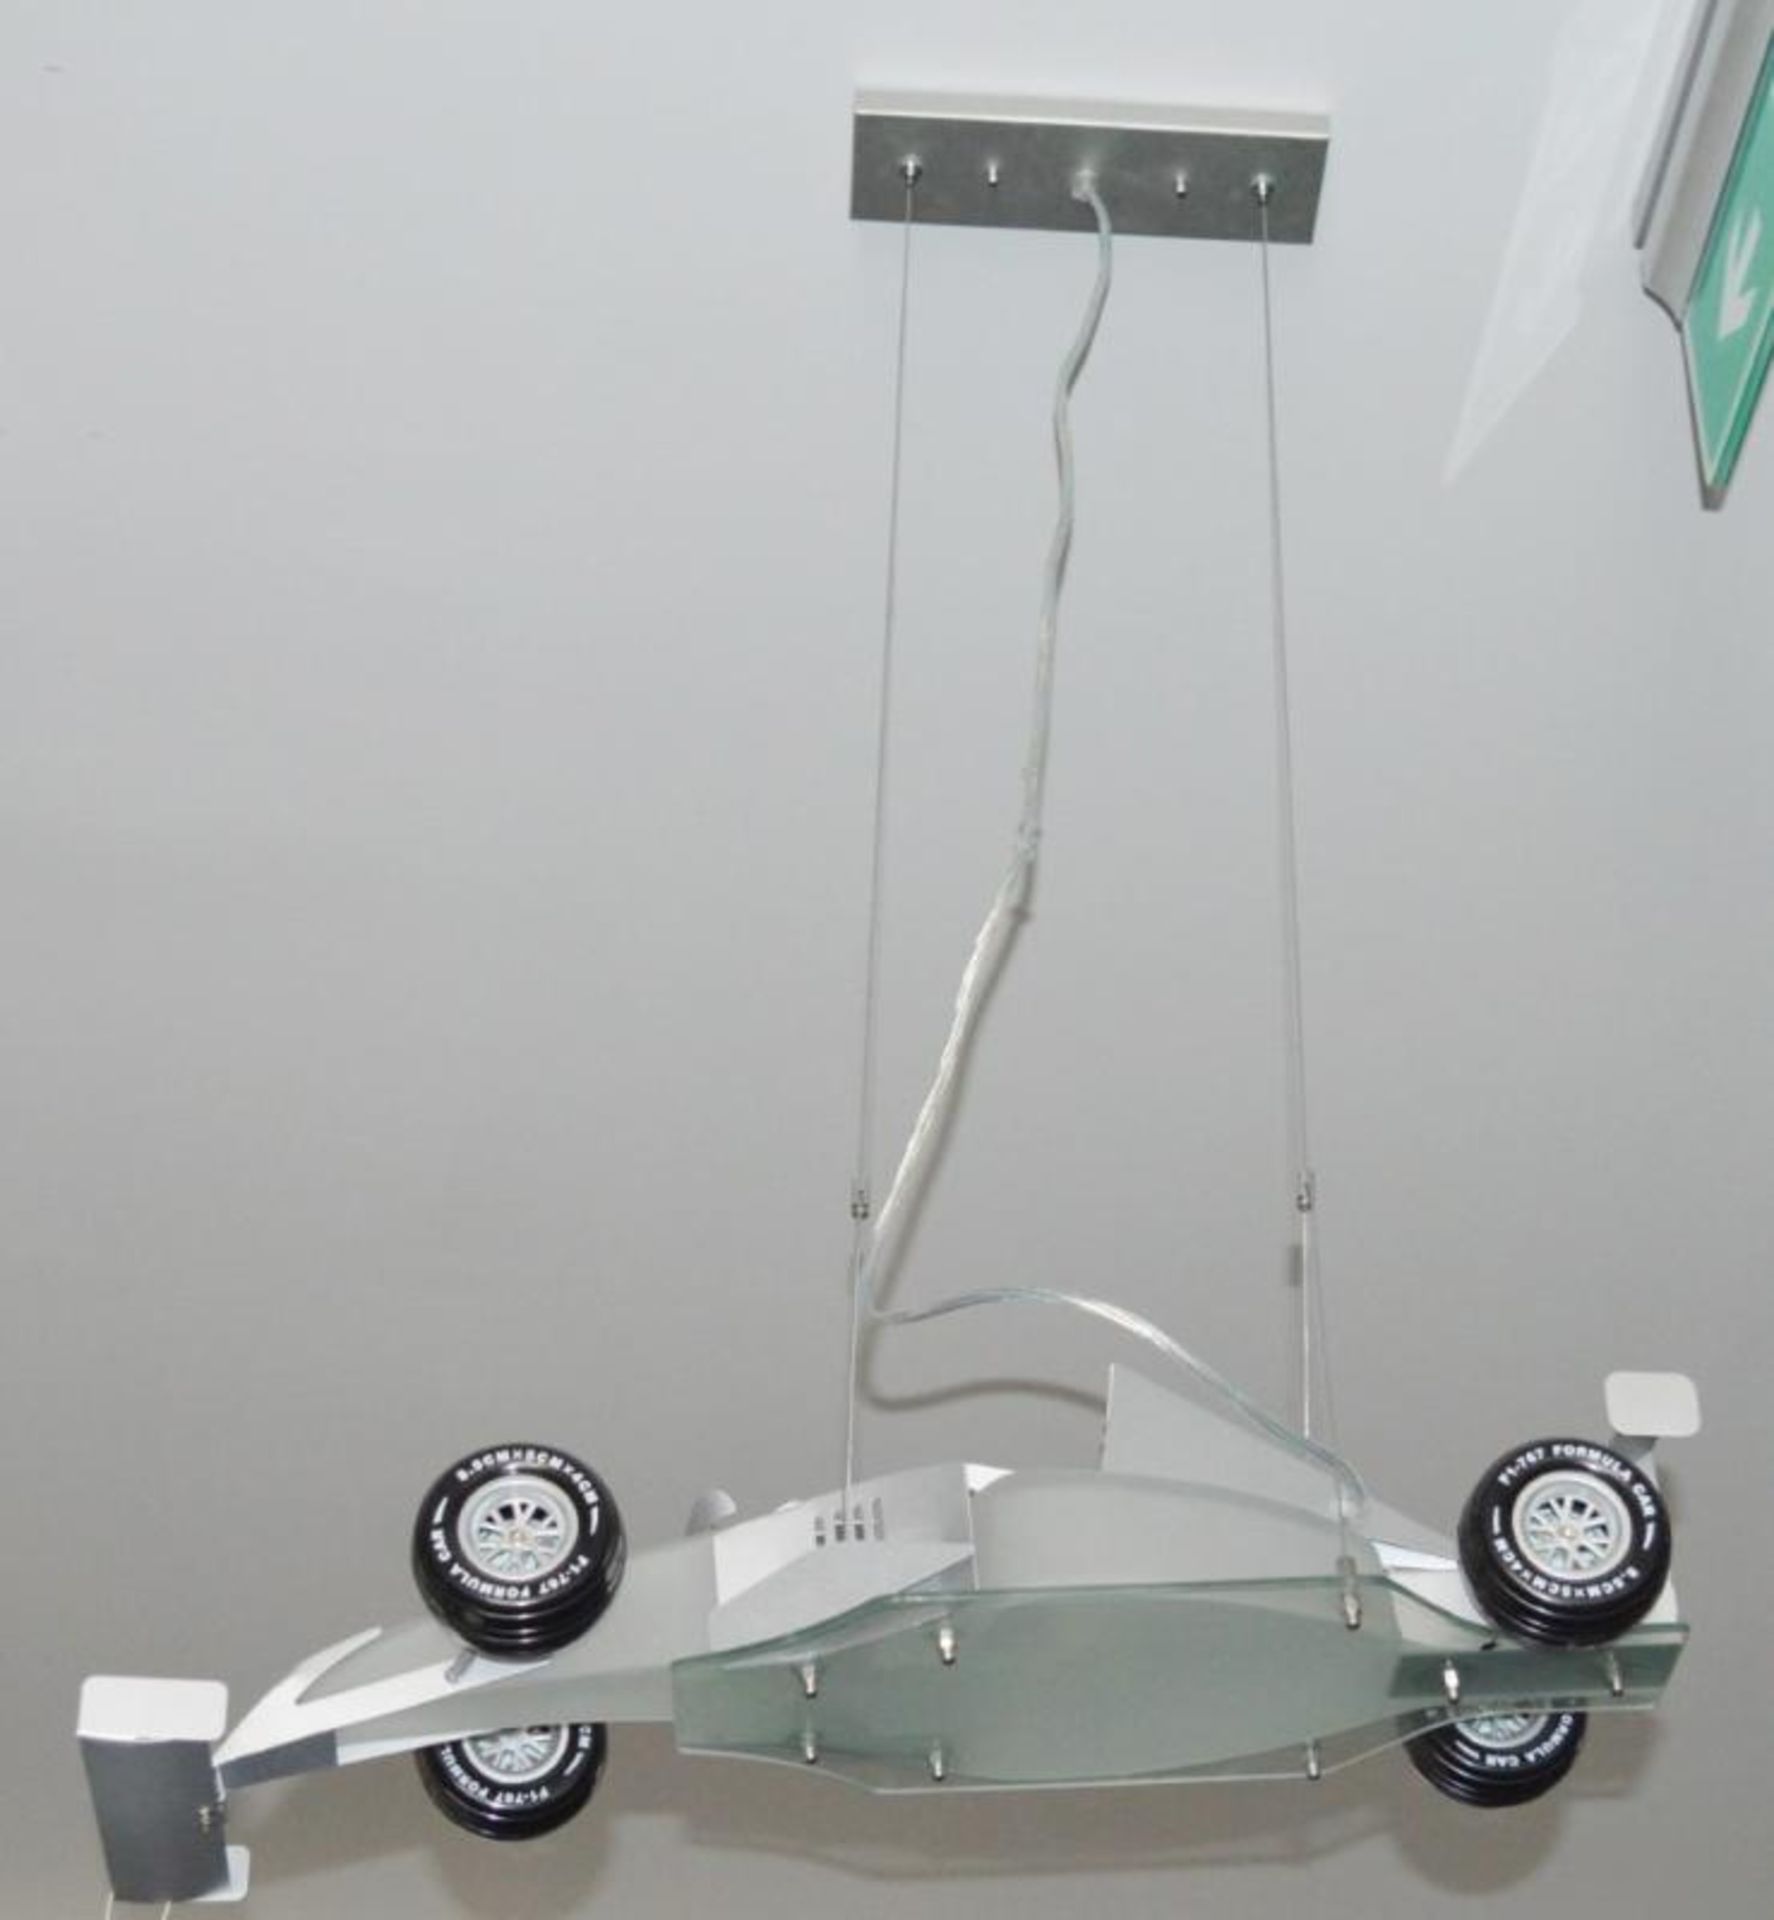 1 x Novelt Satin Silver Racing Car Ceiling Light With Frosted Glass - Ex Display Stock - CL298 - Ref - Image 3 of 3